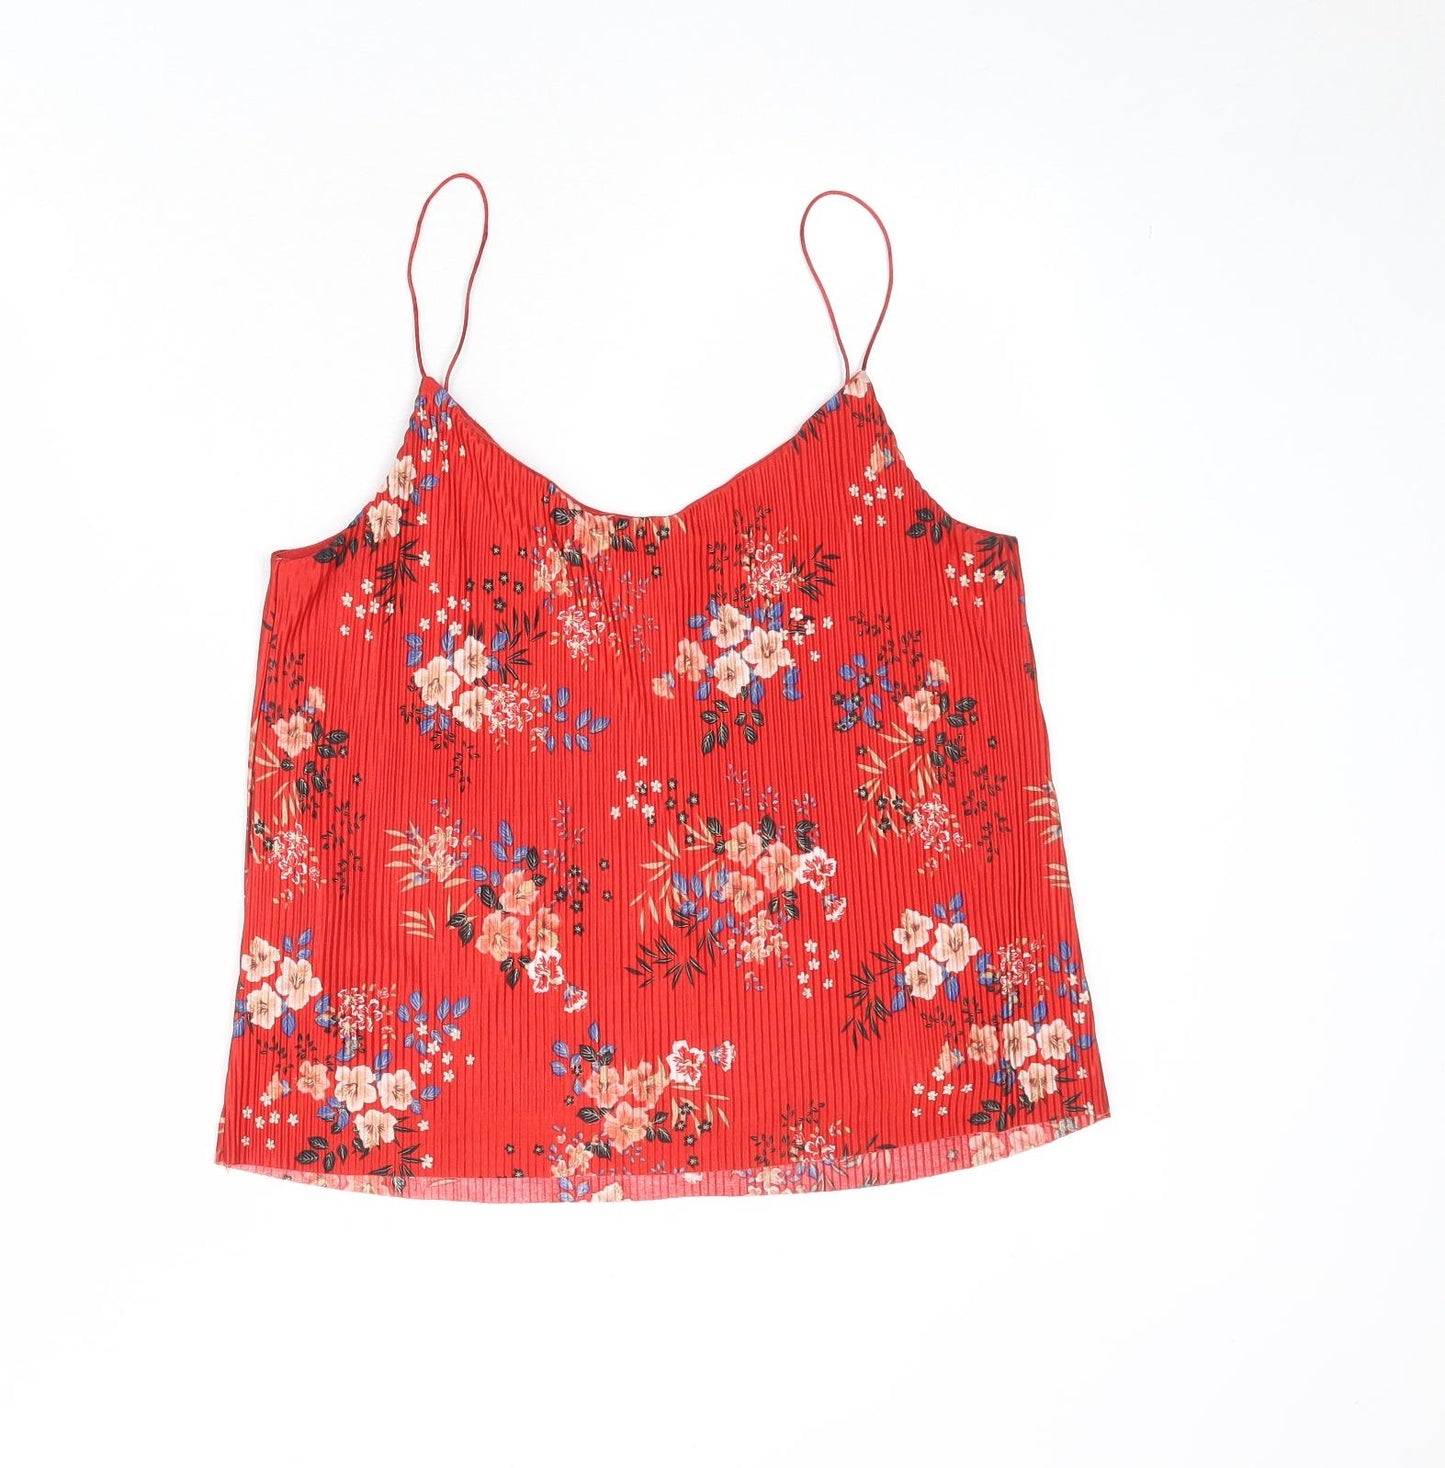 New Look Womens Red Floral Polyester Camisole Tank Size 12 V-Neck - Plisse